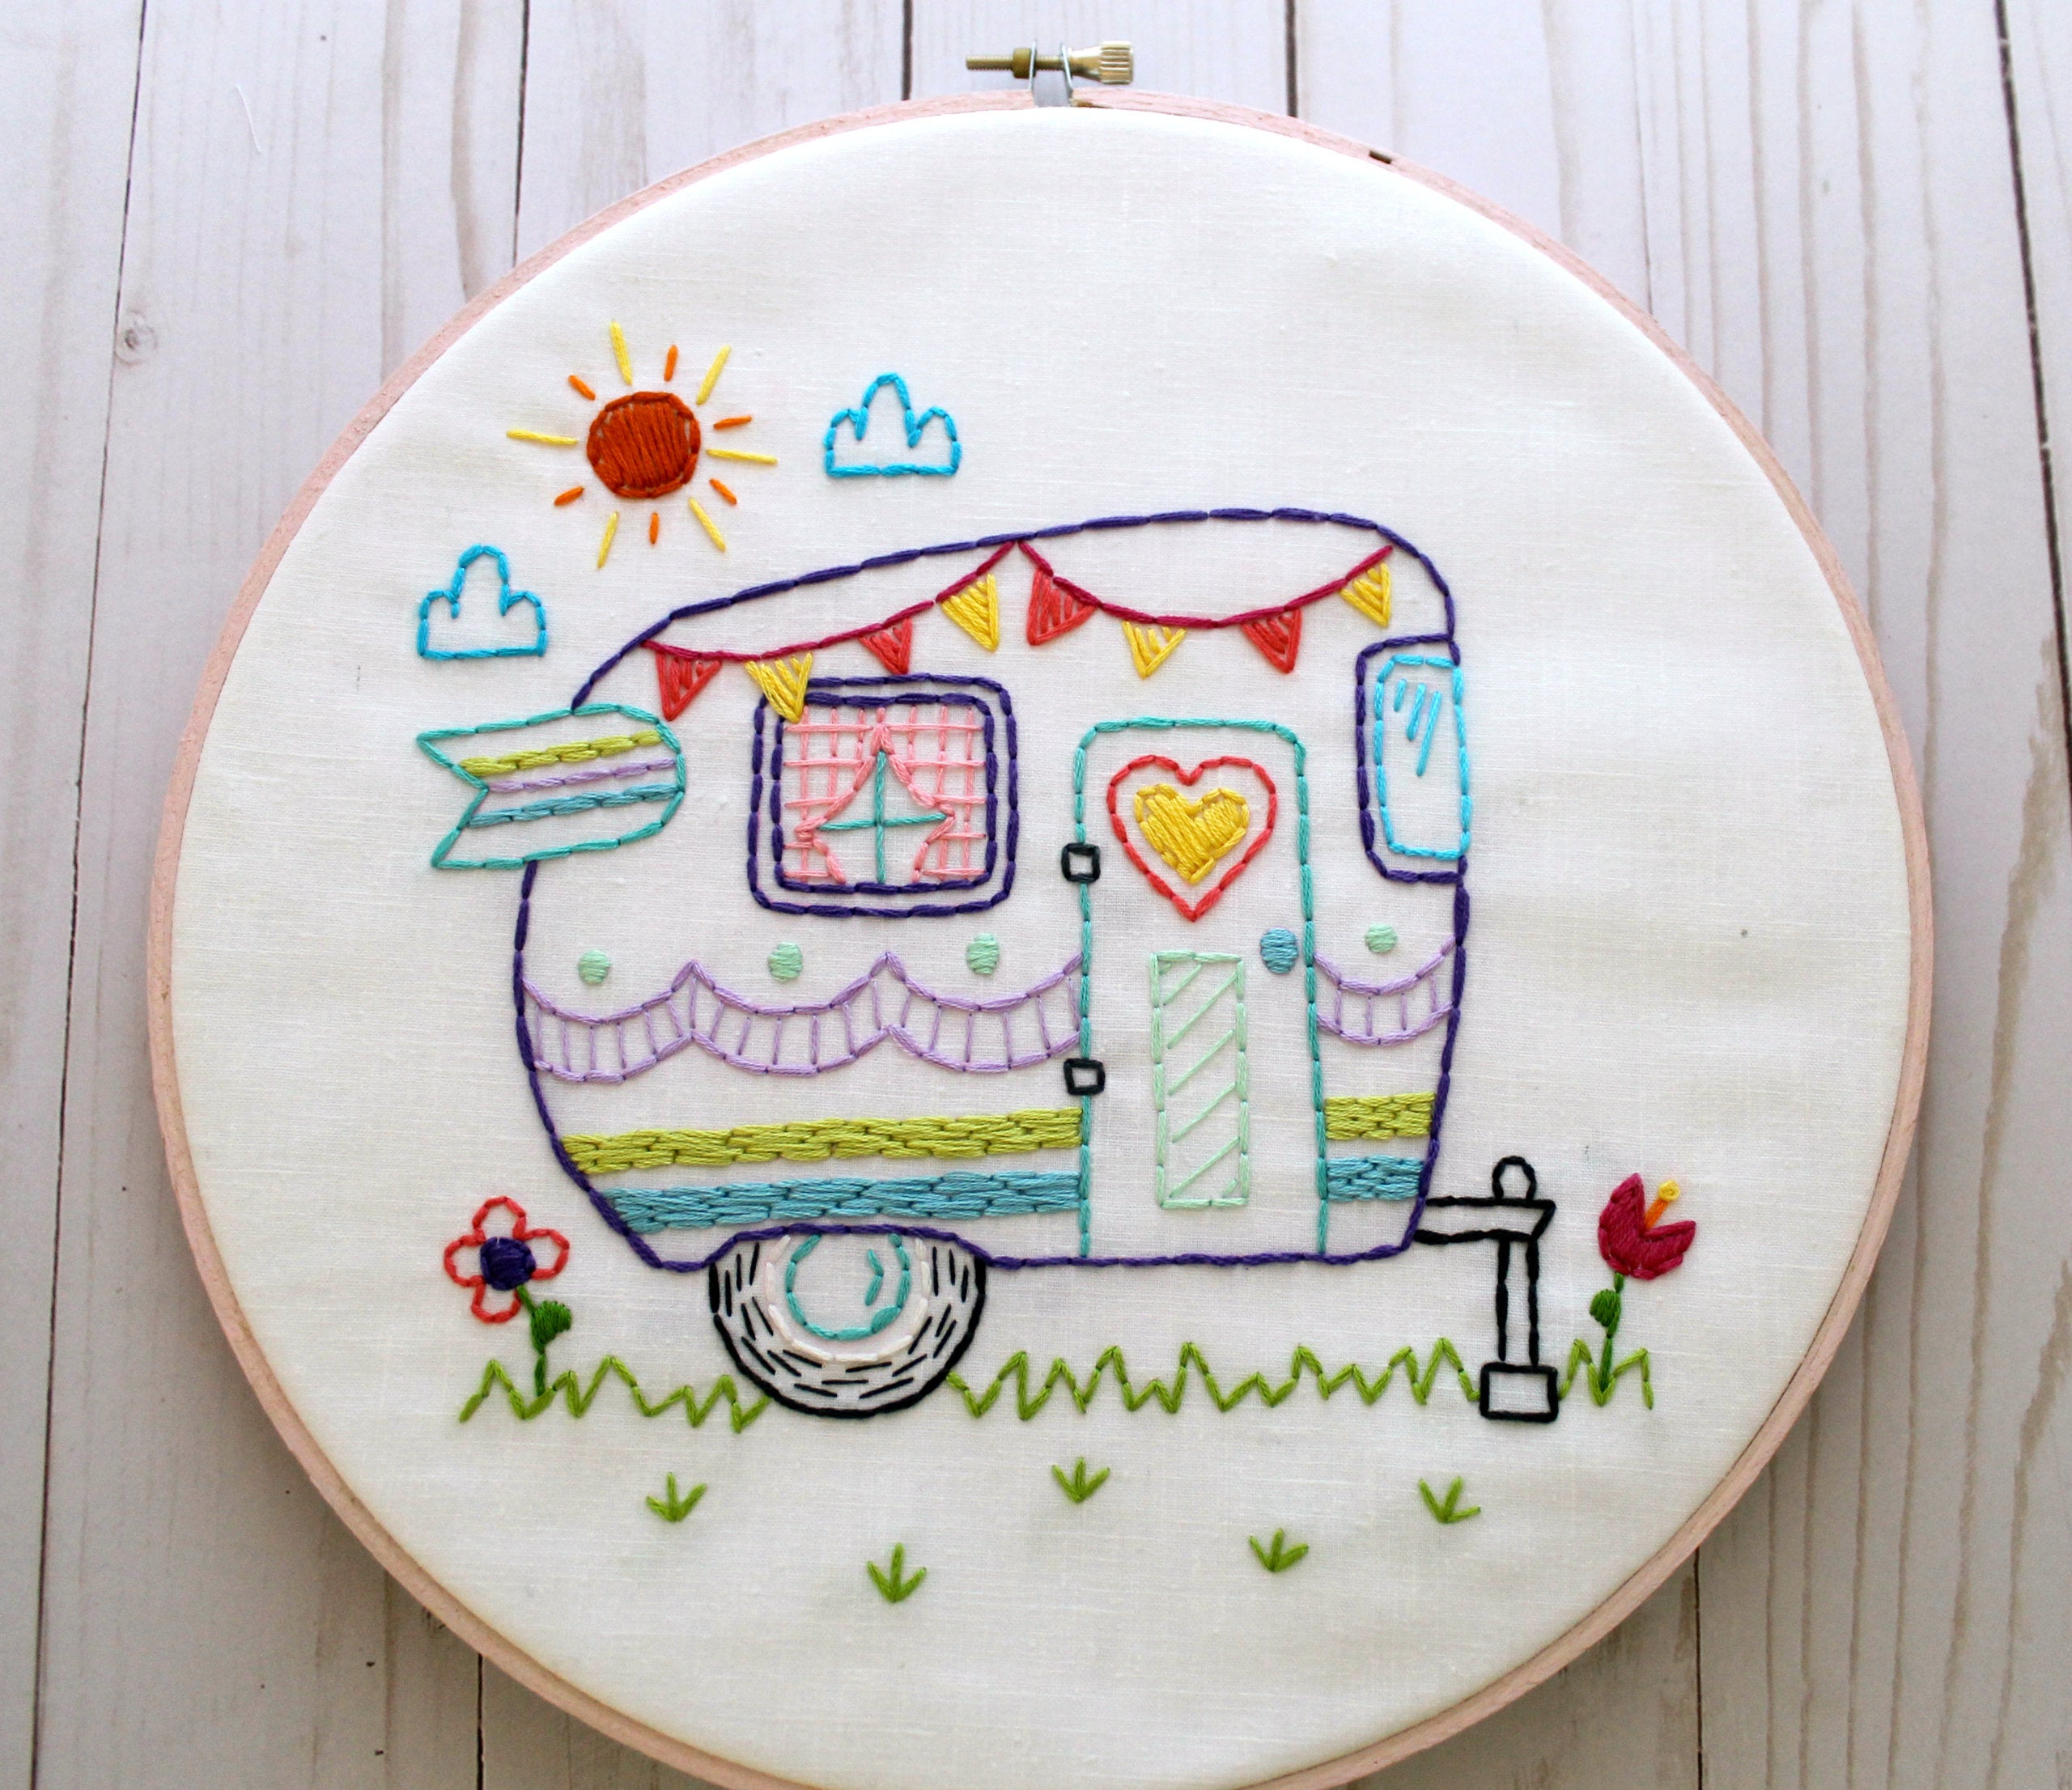 Bead Embroidery Patterns Free Download Retro Camper Hand Embroidery Pattern Pdf Pattern Summer Camping Travel Road Trip Embroidery Designs Vintage Camper Happy Camper